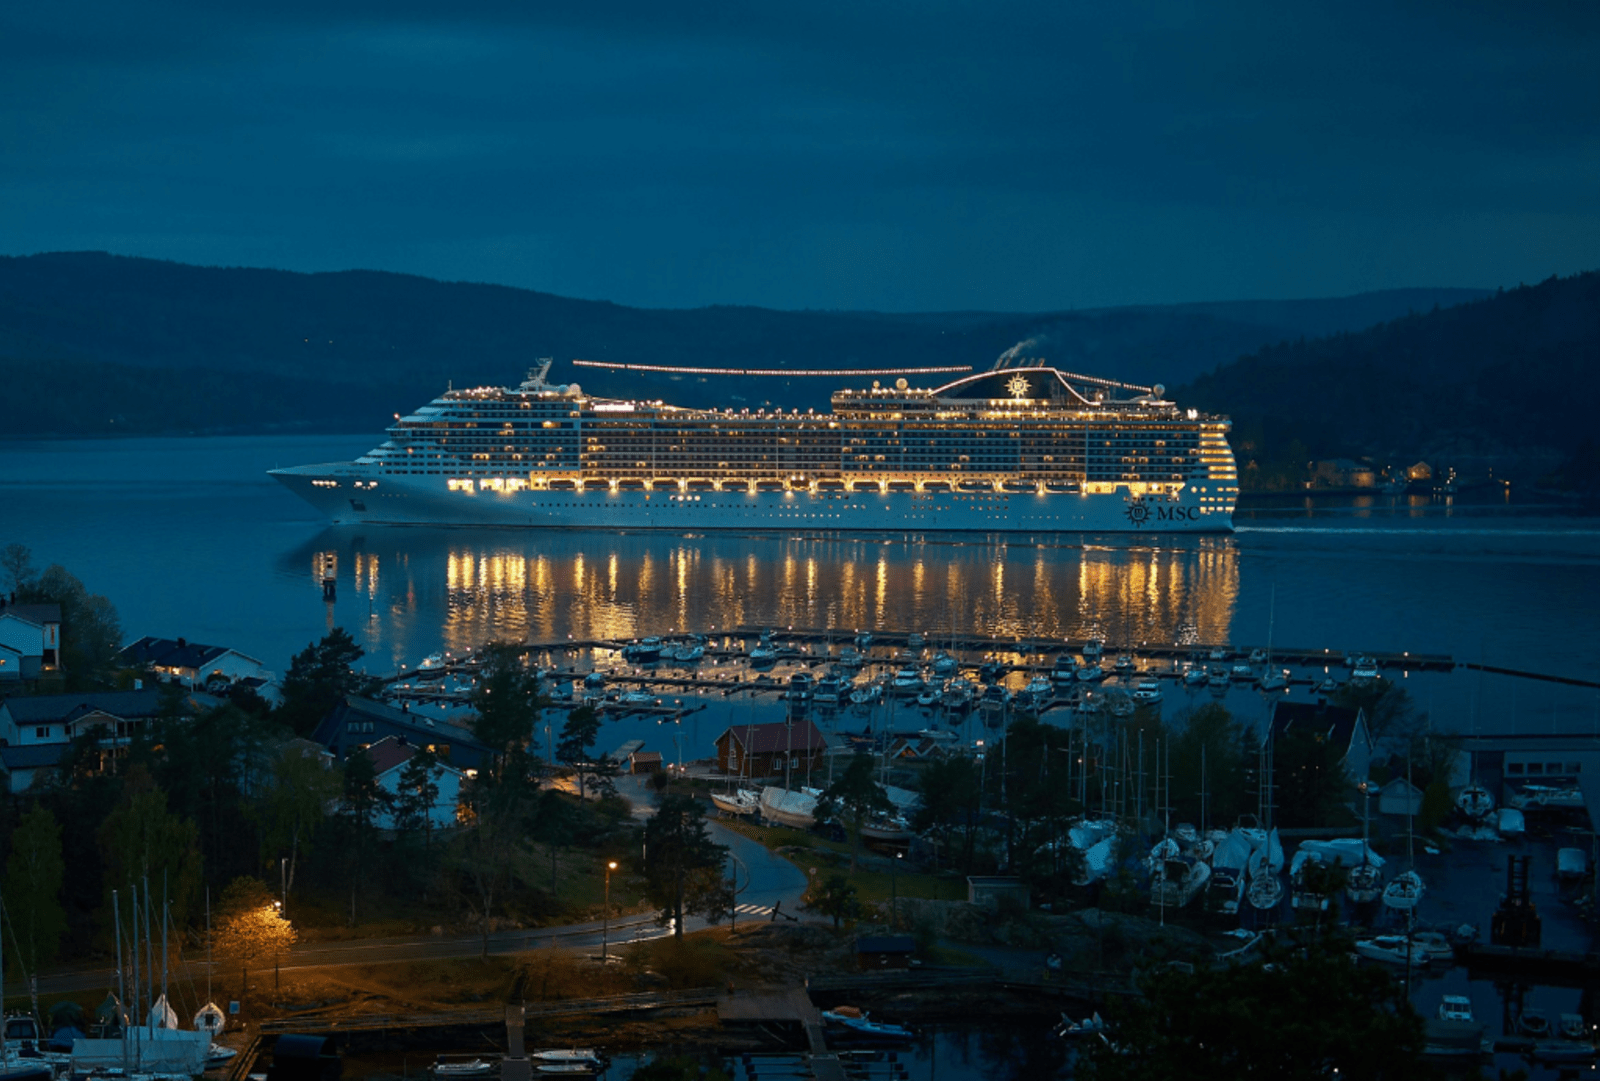 A cruise liner sails into a hilly harbour at night.